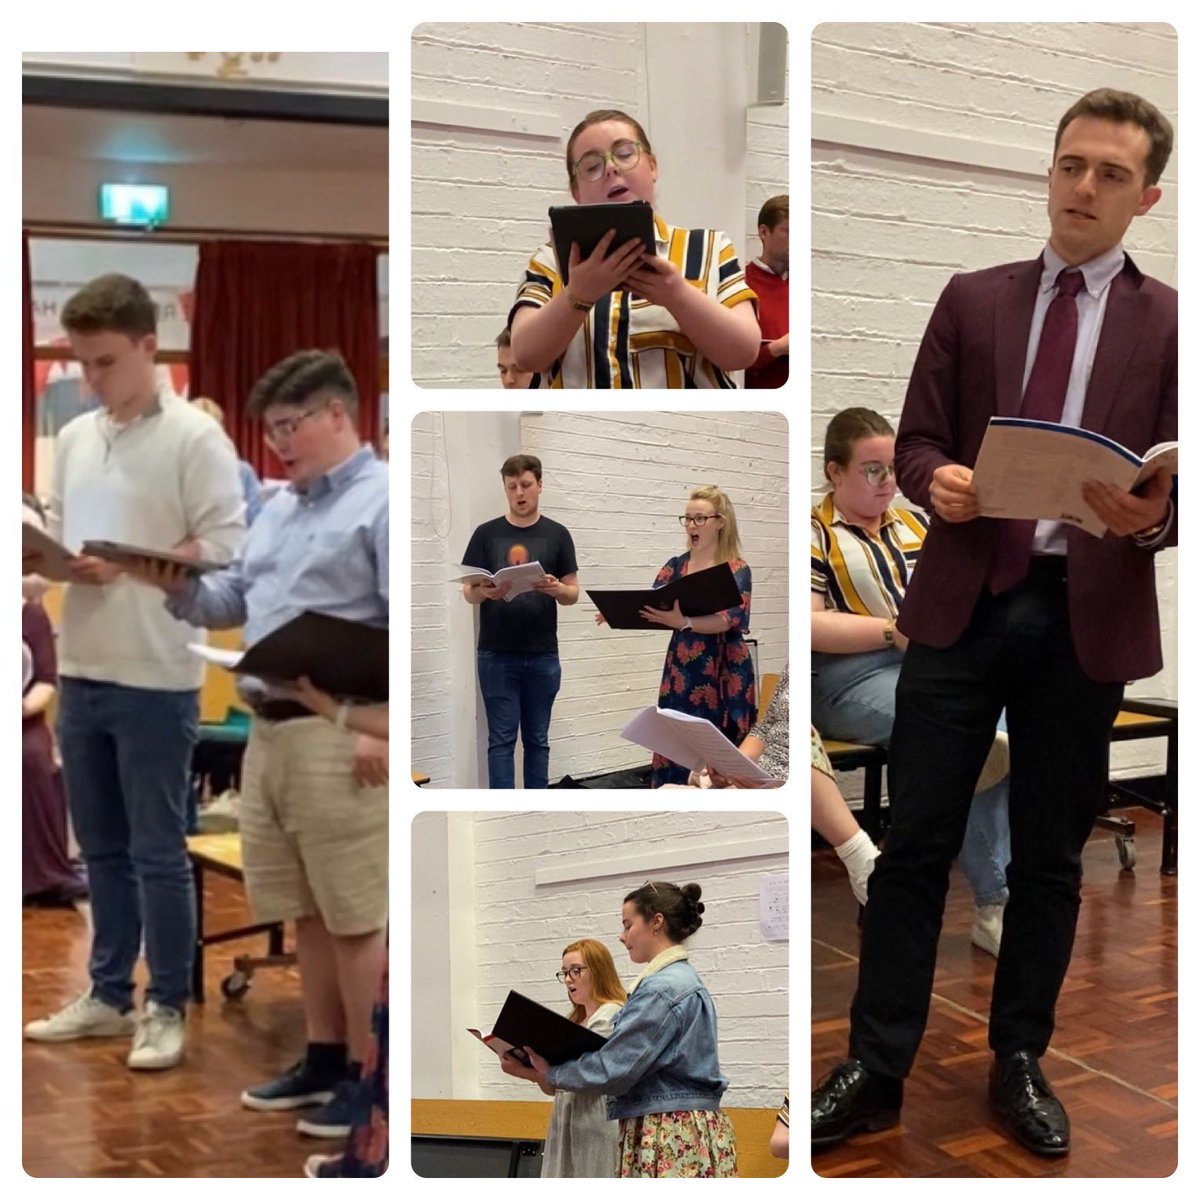 Such a fun rehearsal last night with our fantastic @TUconservatoire soloists. They blew us away.  Kick off your Bank Holiday with our Summer of Vivaldi concert and hear the soloists of the future perform. #summer #vivaldi #ThingsToDo #soloists #dublinactivities #dublintown